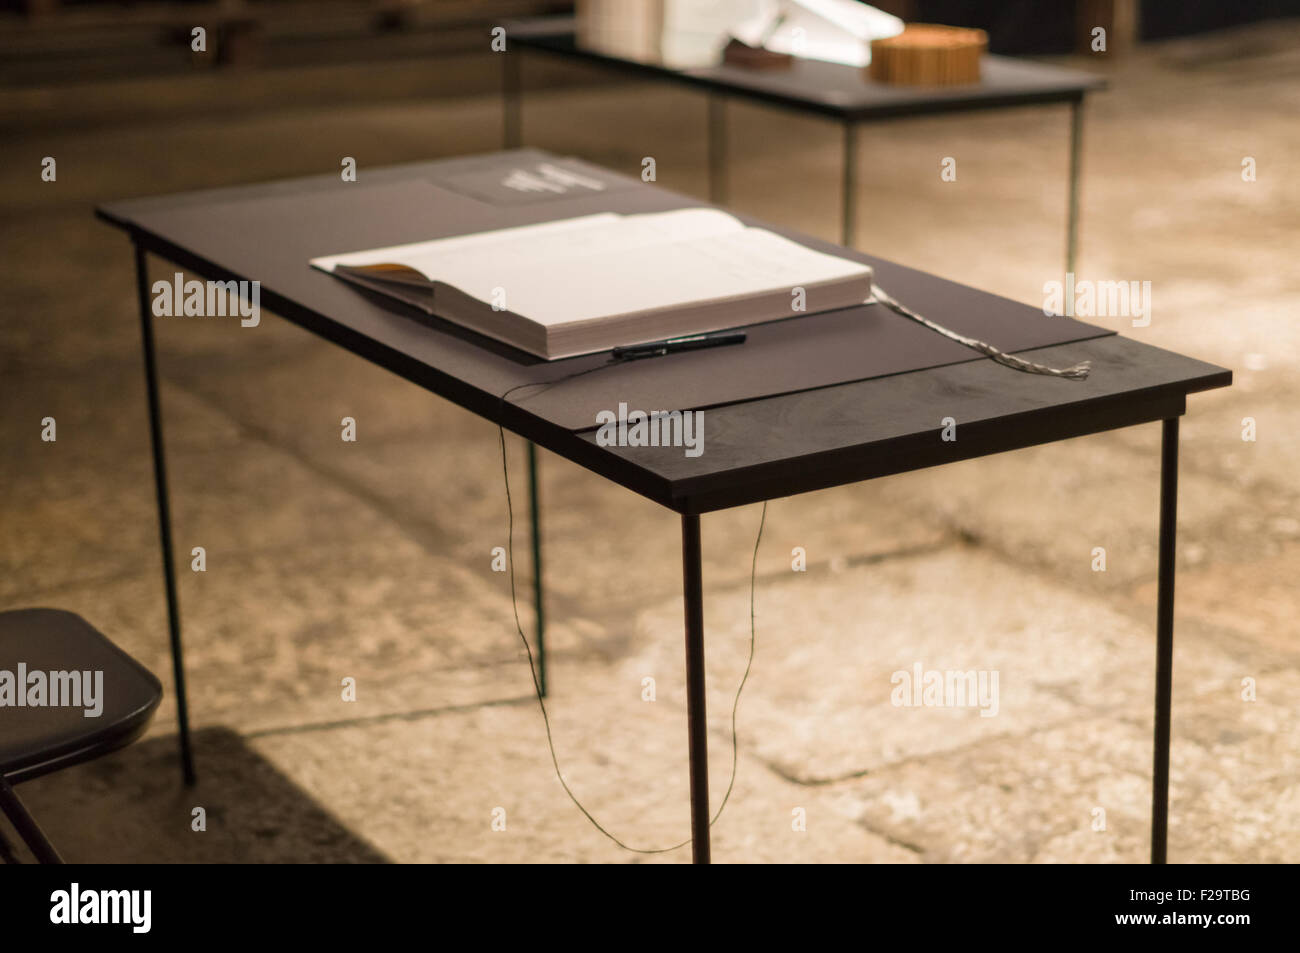 Blurred image of table with guestbook and pen Stock Photo